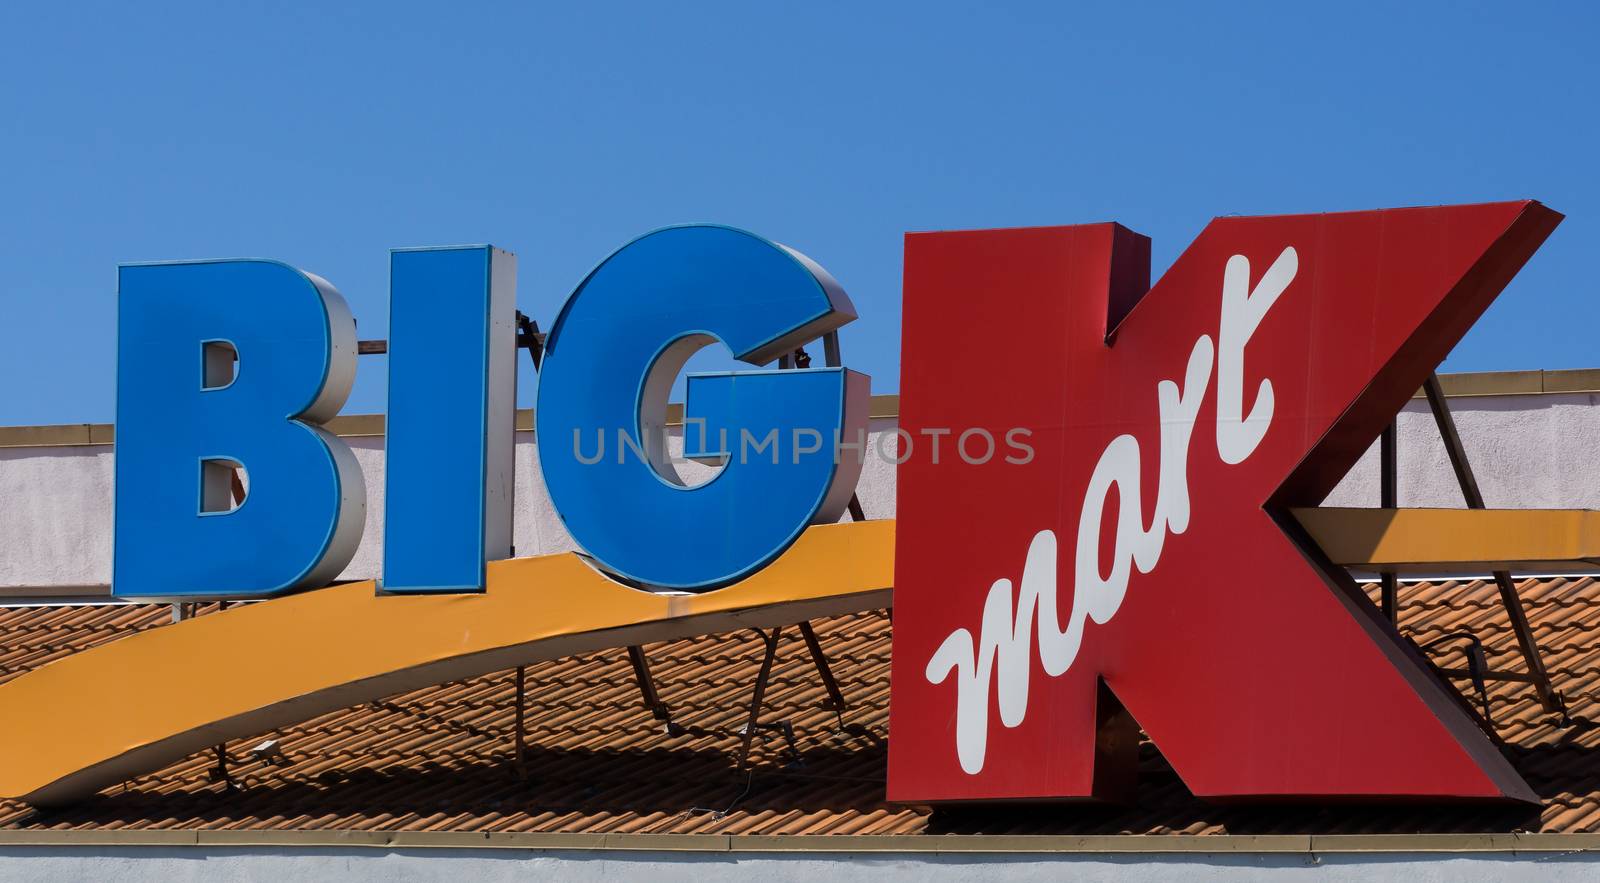 ANAHEIM, CA/USA - OCTOBER 10, 2015: Big Kmart retail store exterior. Kmart is an American chain of discount department stores headquartered in the United States.